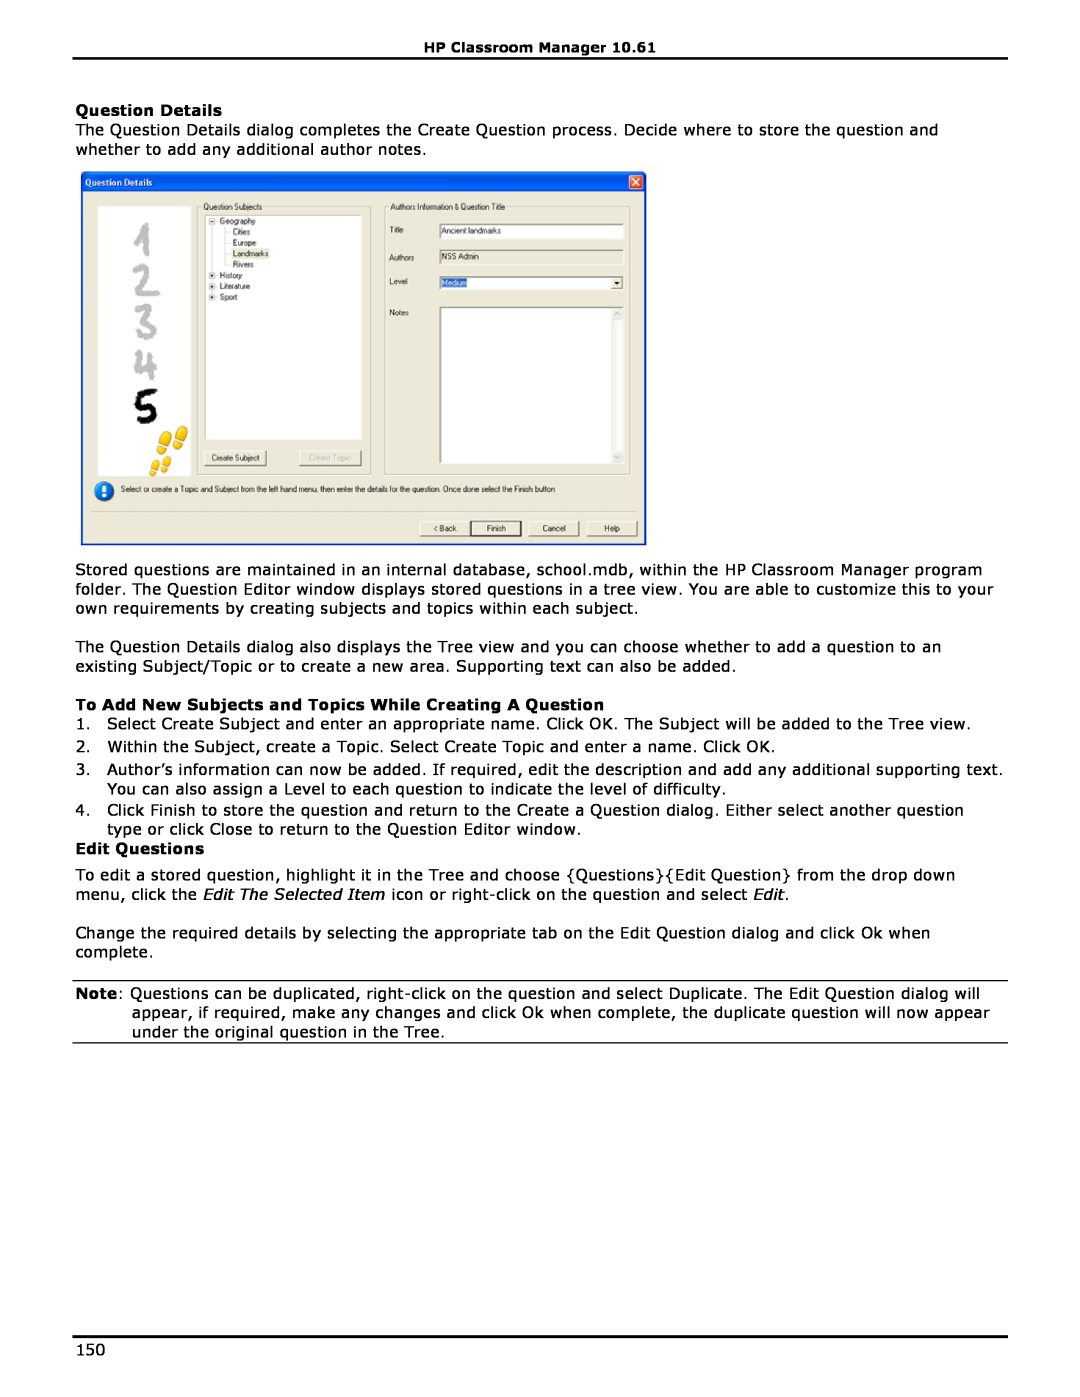 HP Classroom Manager manual Question Details, To Add New Subjects and Topics While Creating A Question, Edit Questions 